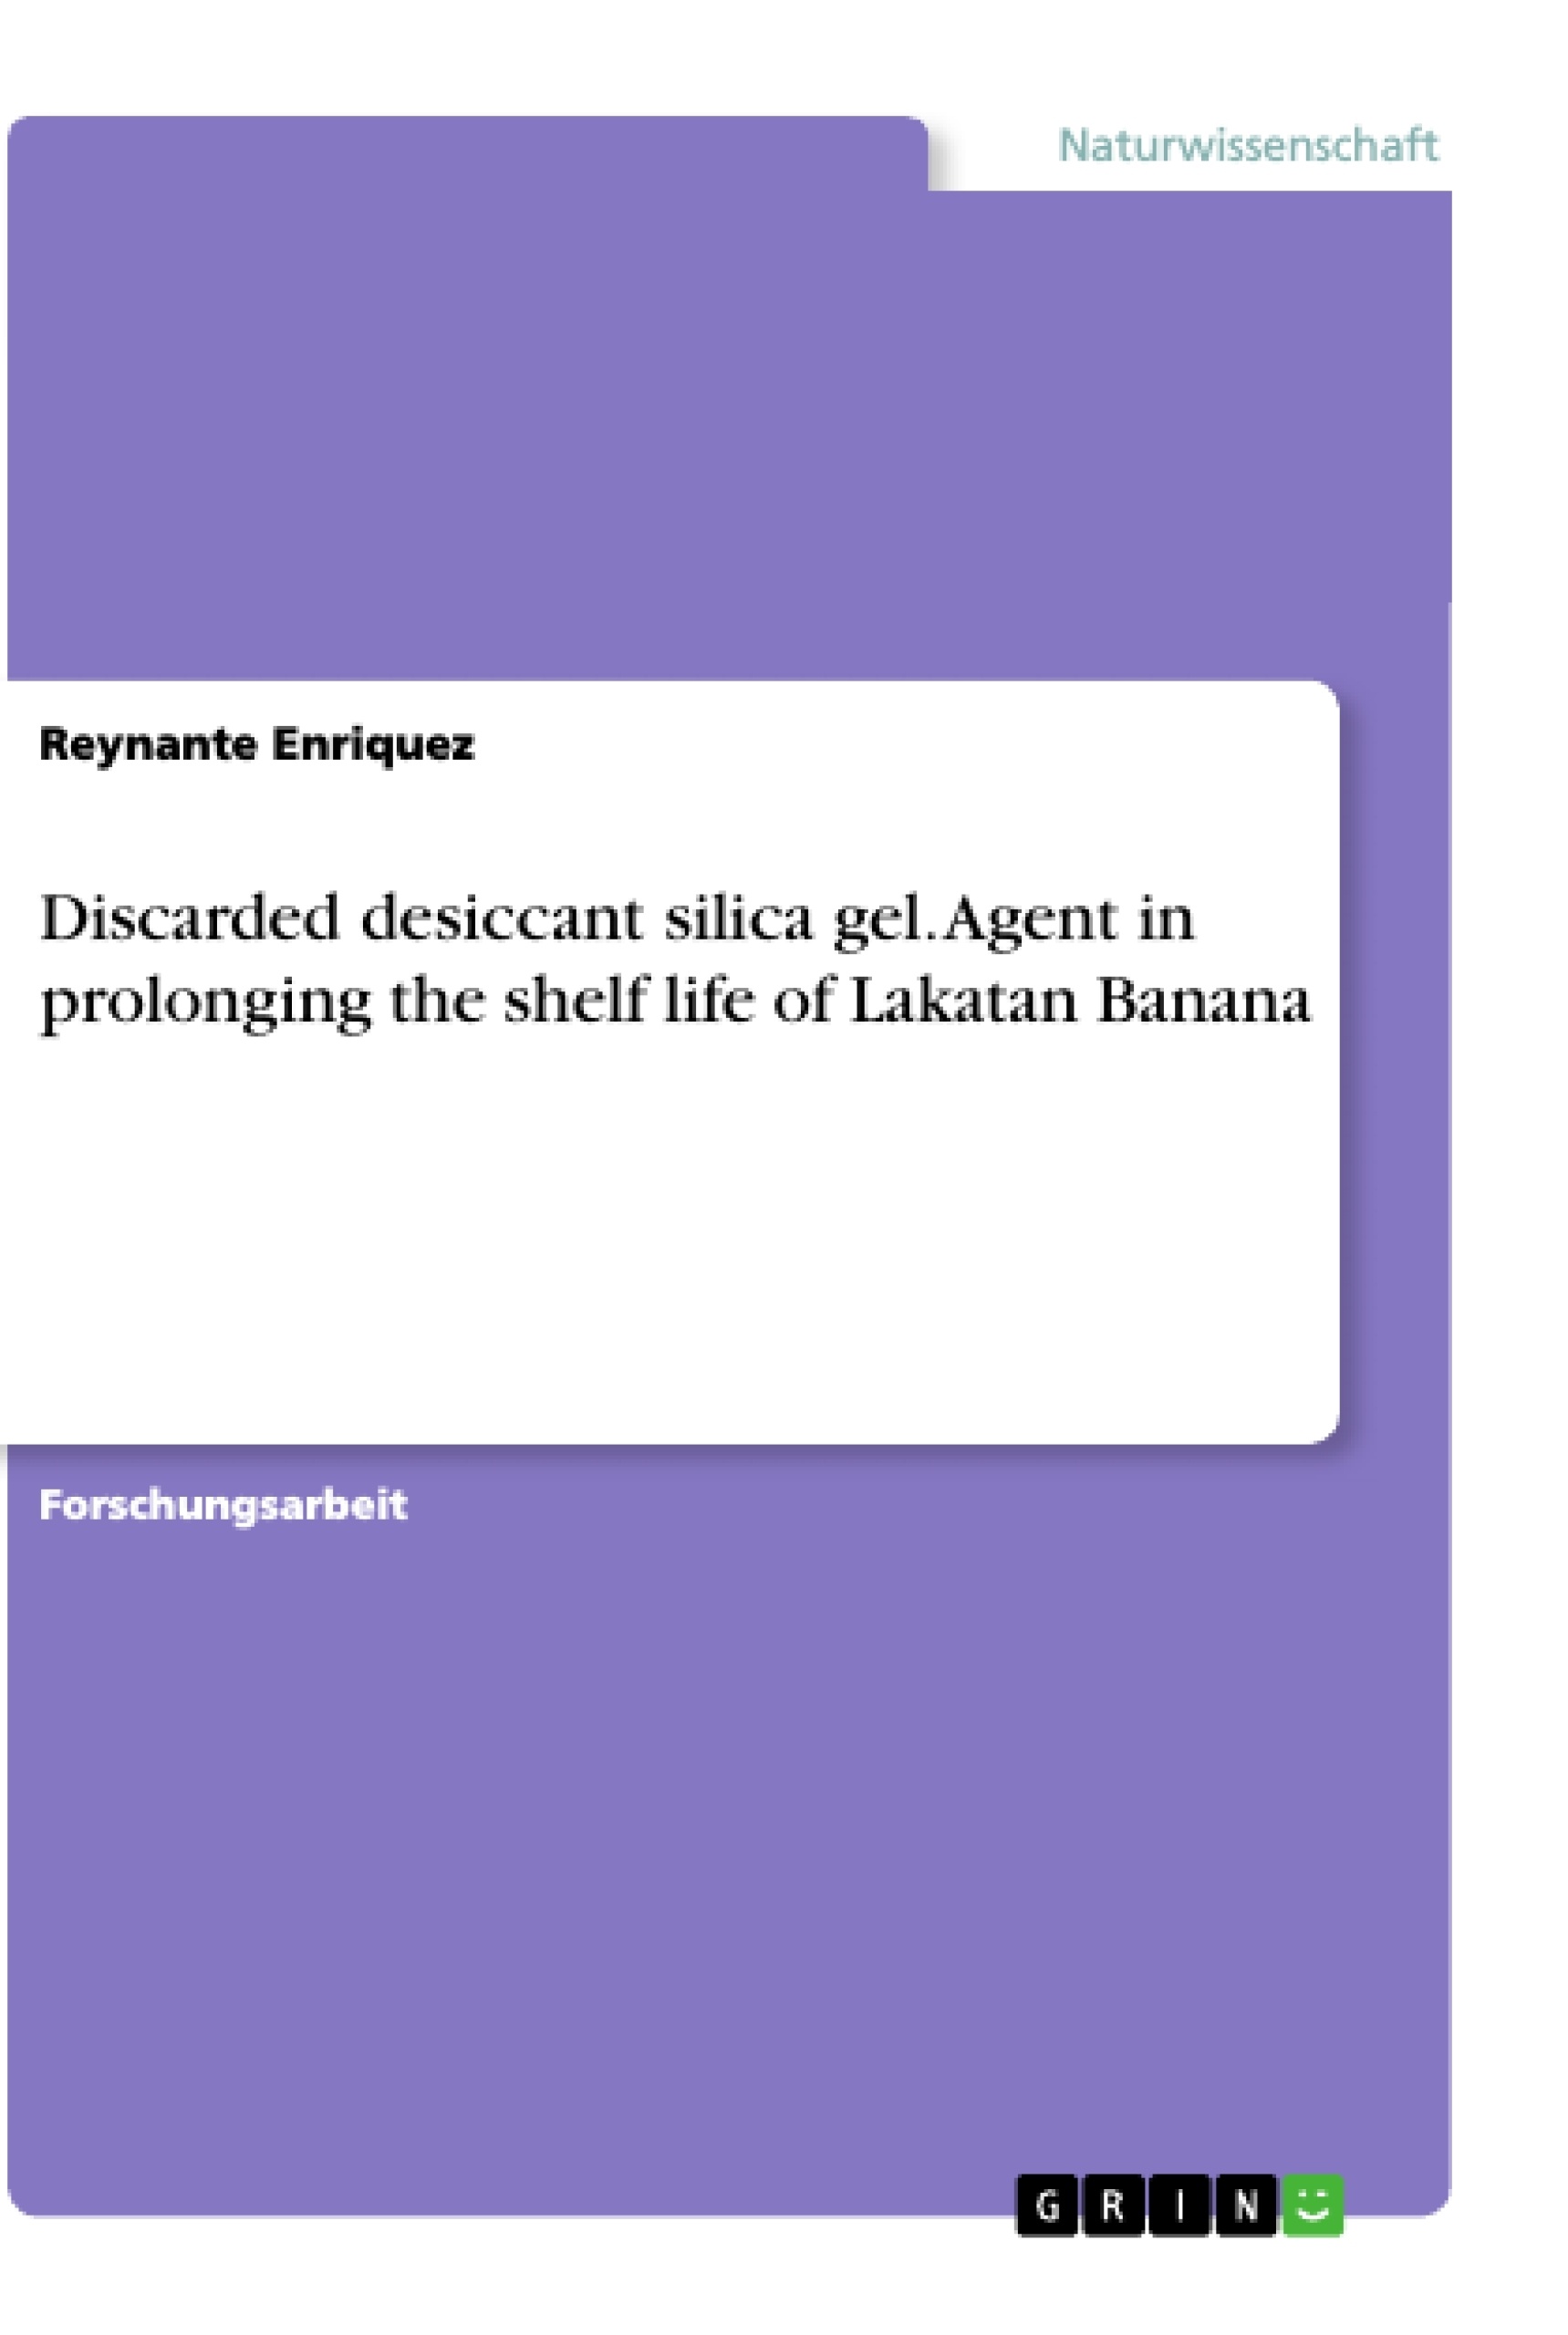 Título: Discarded desiccant silica gel. Agent in prolonging the shelf life of Lakatan Banana